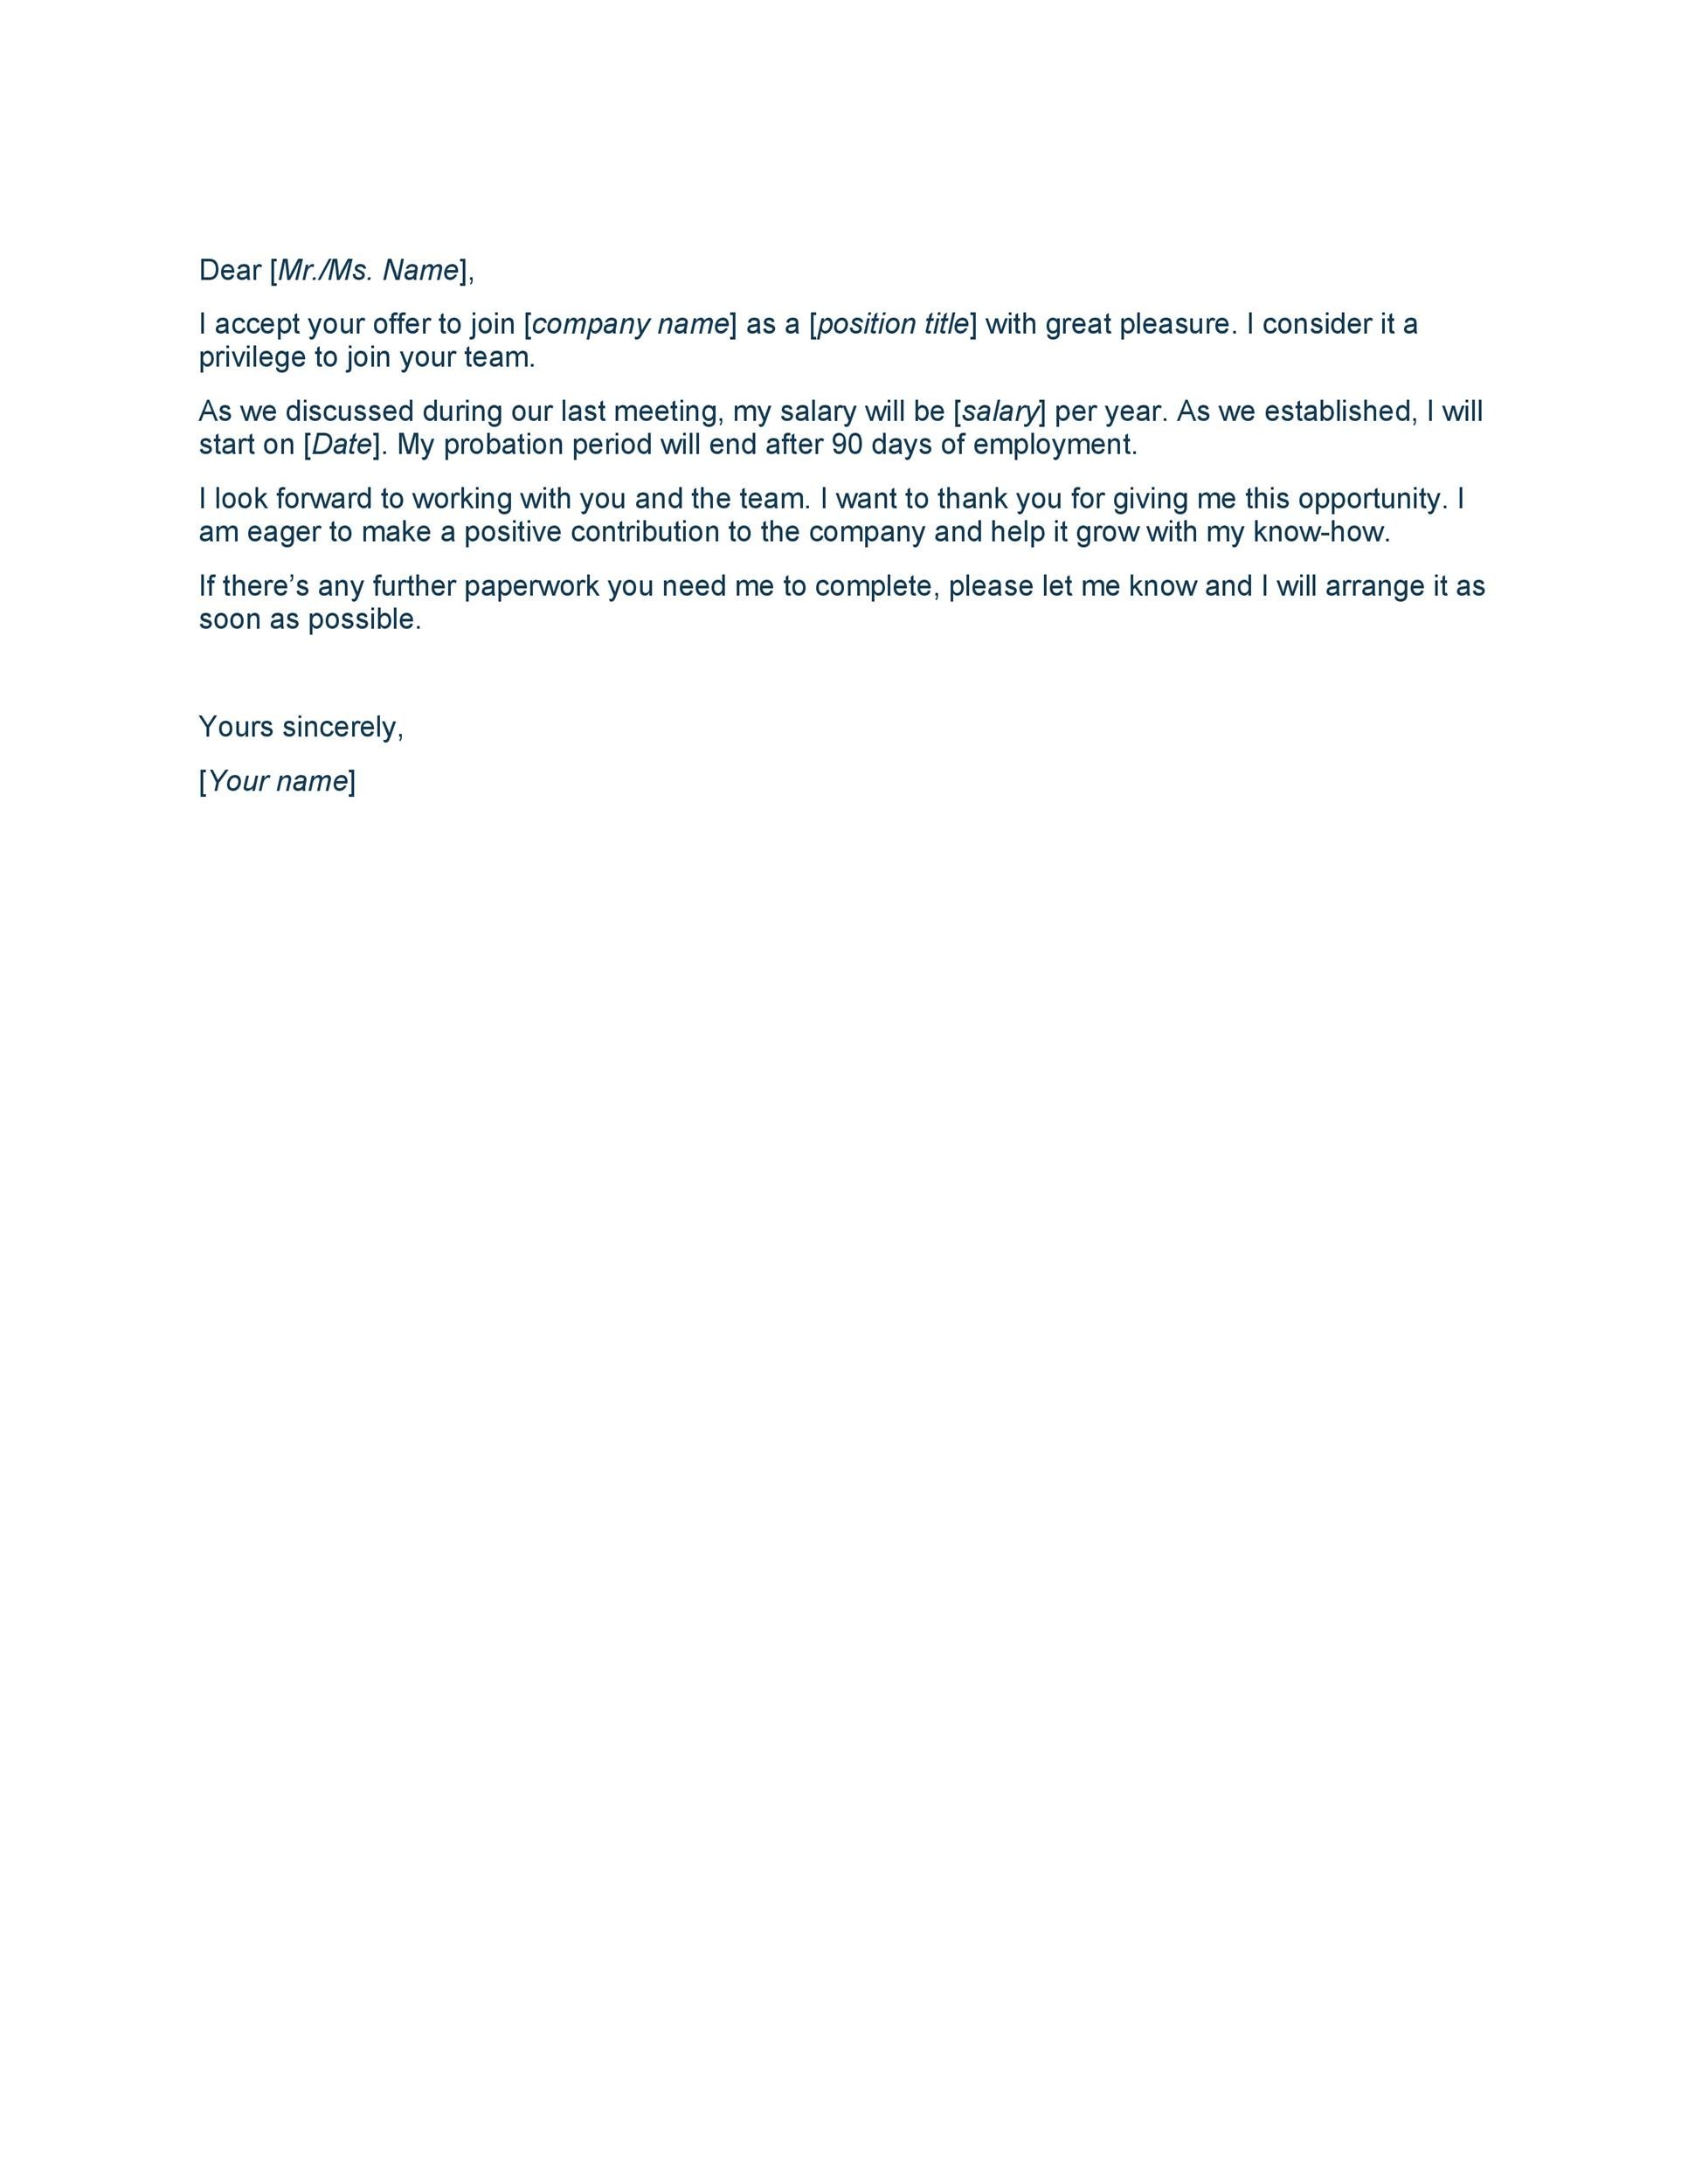 40 Professional Job Offer Acceptance Letter Email Templates ᐅ TemplateLab